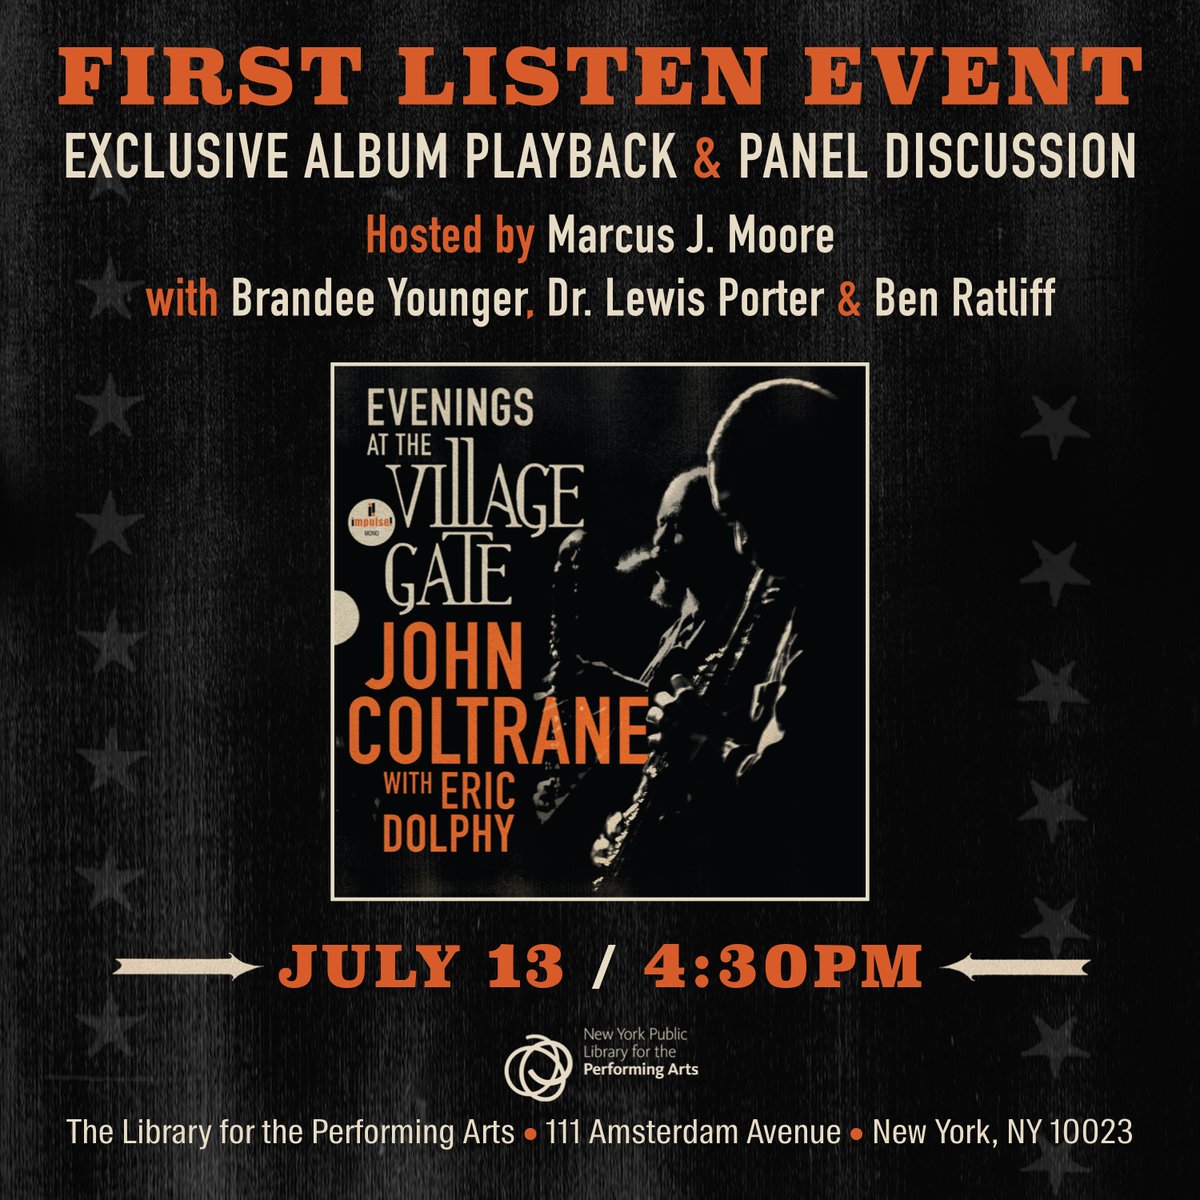 The @nypl_lpa hosts an exclusive first listen with of a new album of never before heard music by @johncoltrane with Eric Dolphy recorded live at the Village Gate in 1961. Get tickets here! eventbrite.com/e/first-listen…